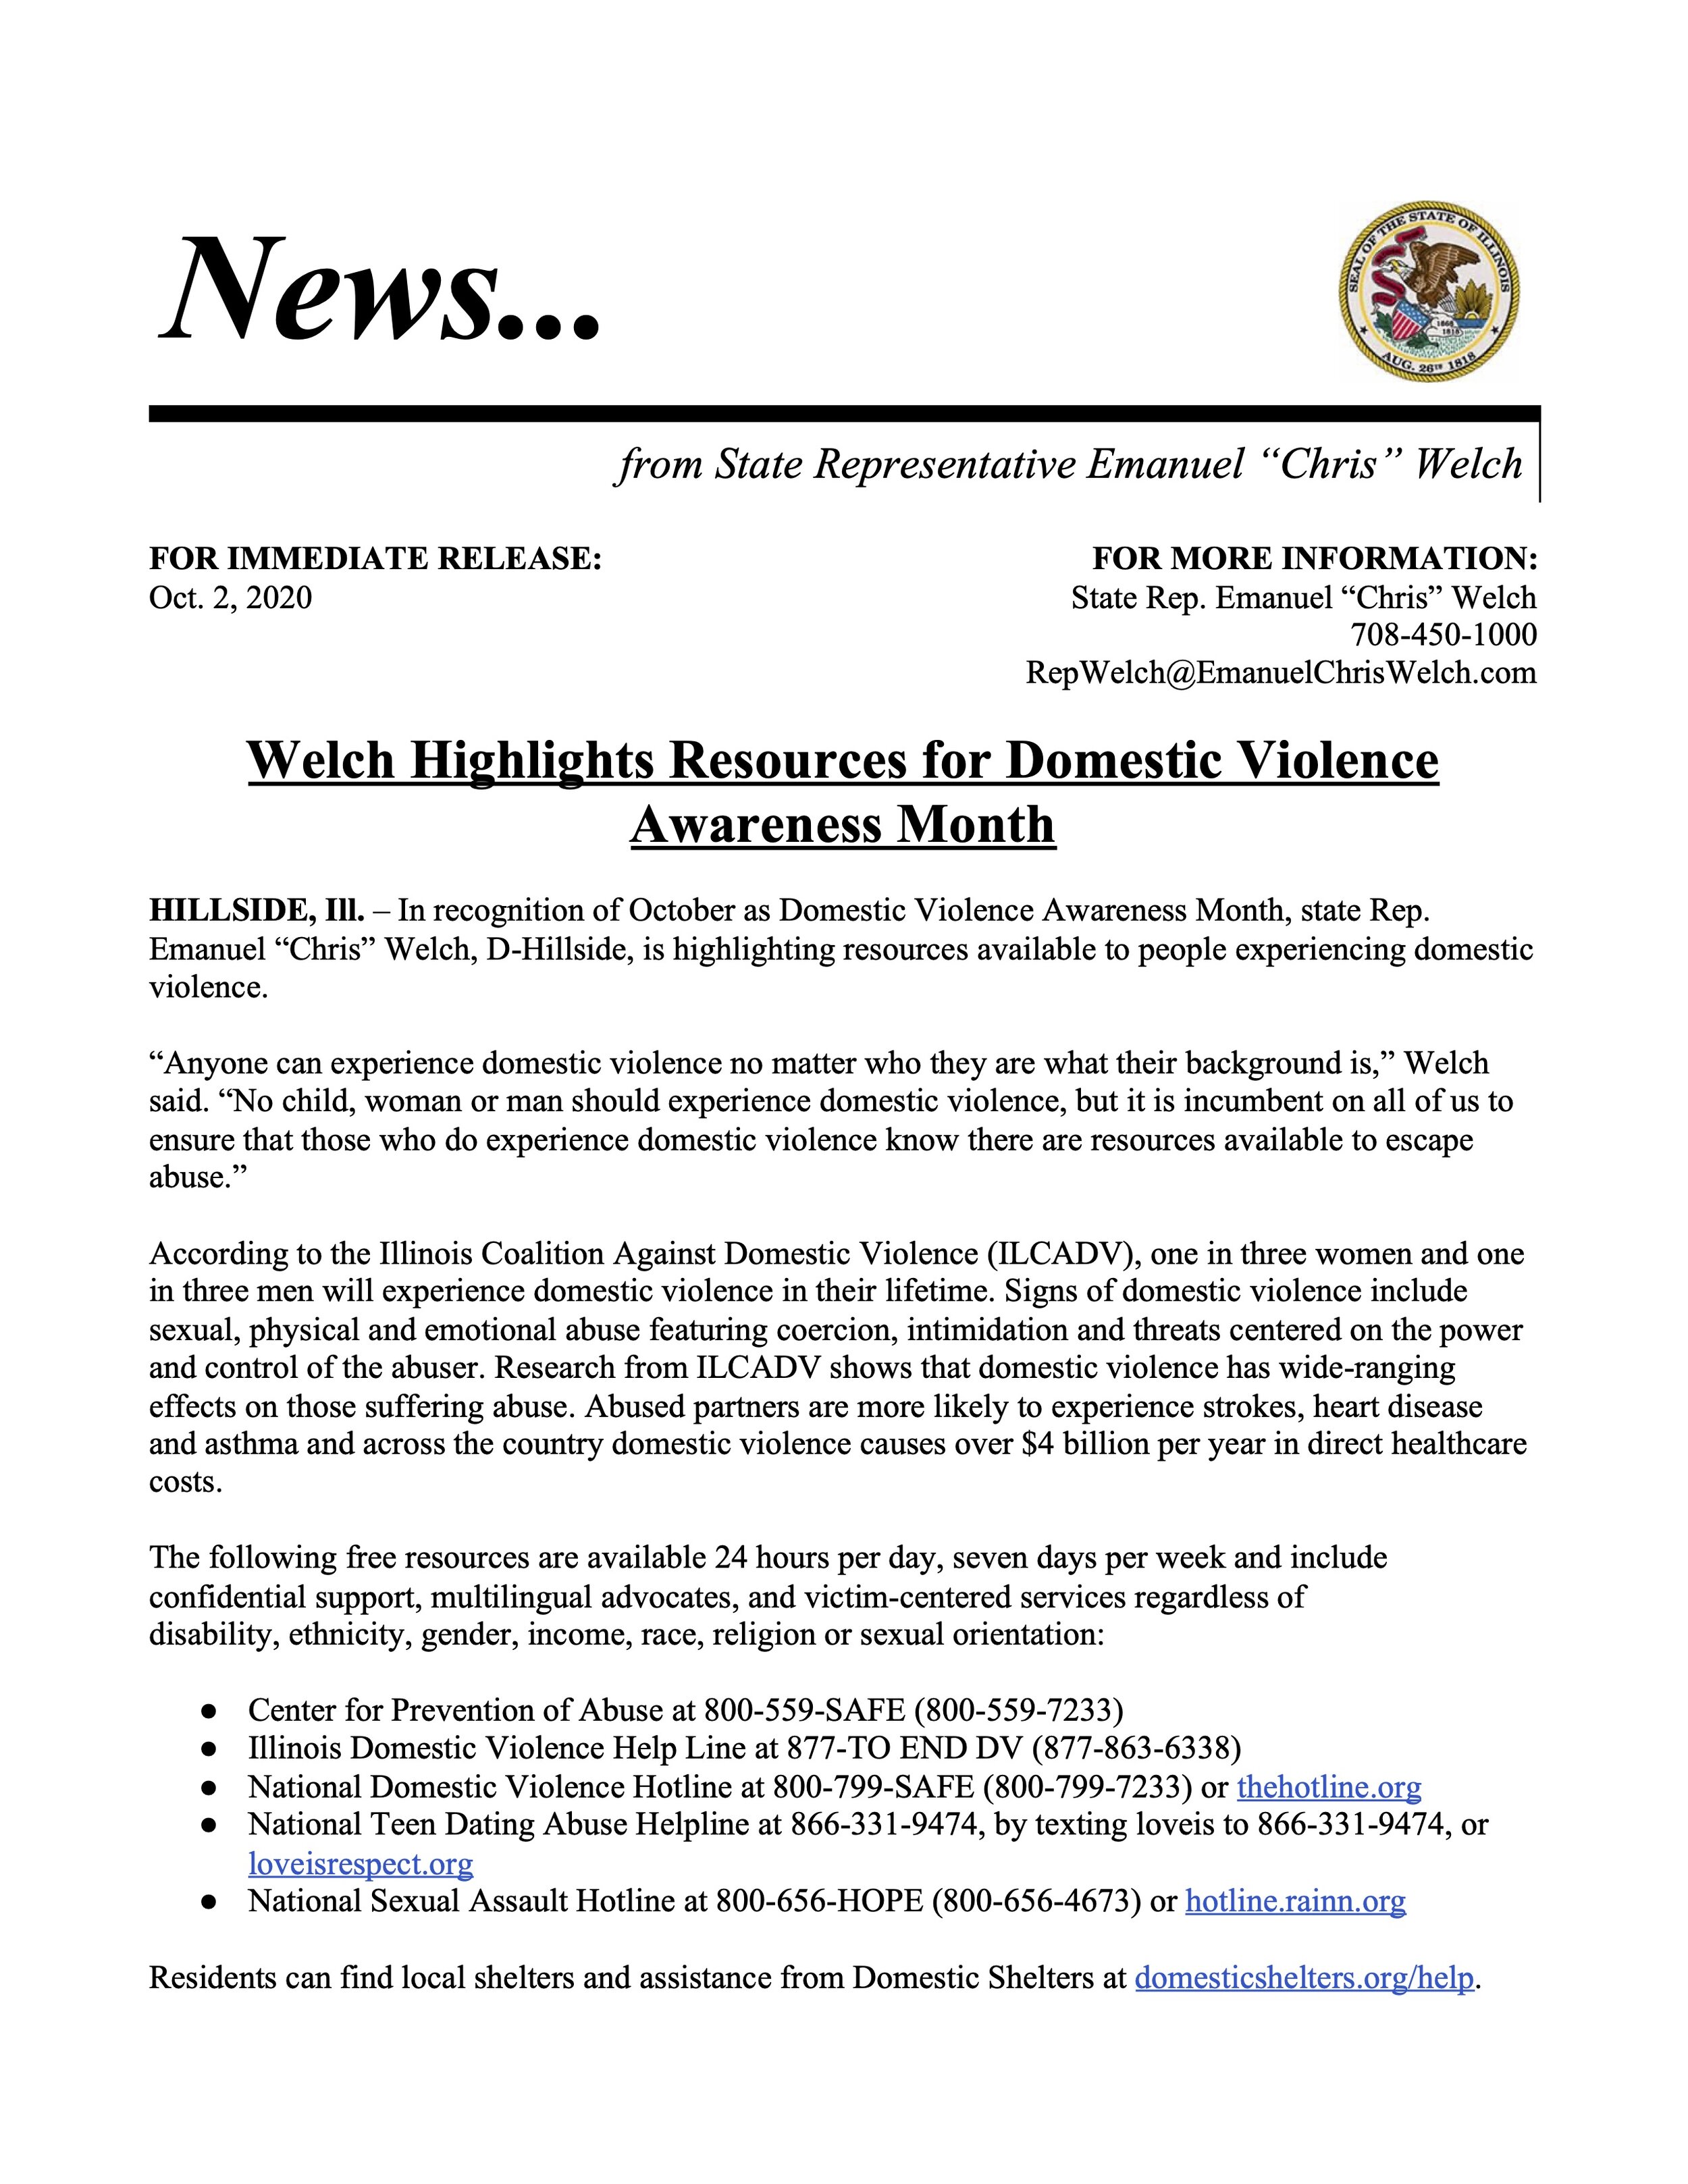 100220 Rep. Welch Domestic Violence Awareness Month 2020.jpg